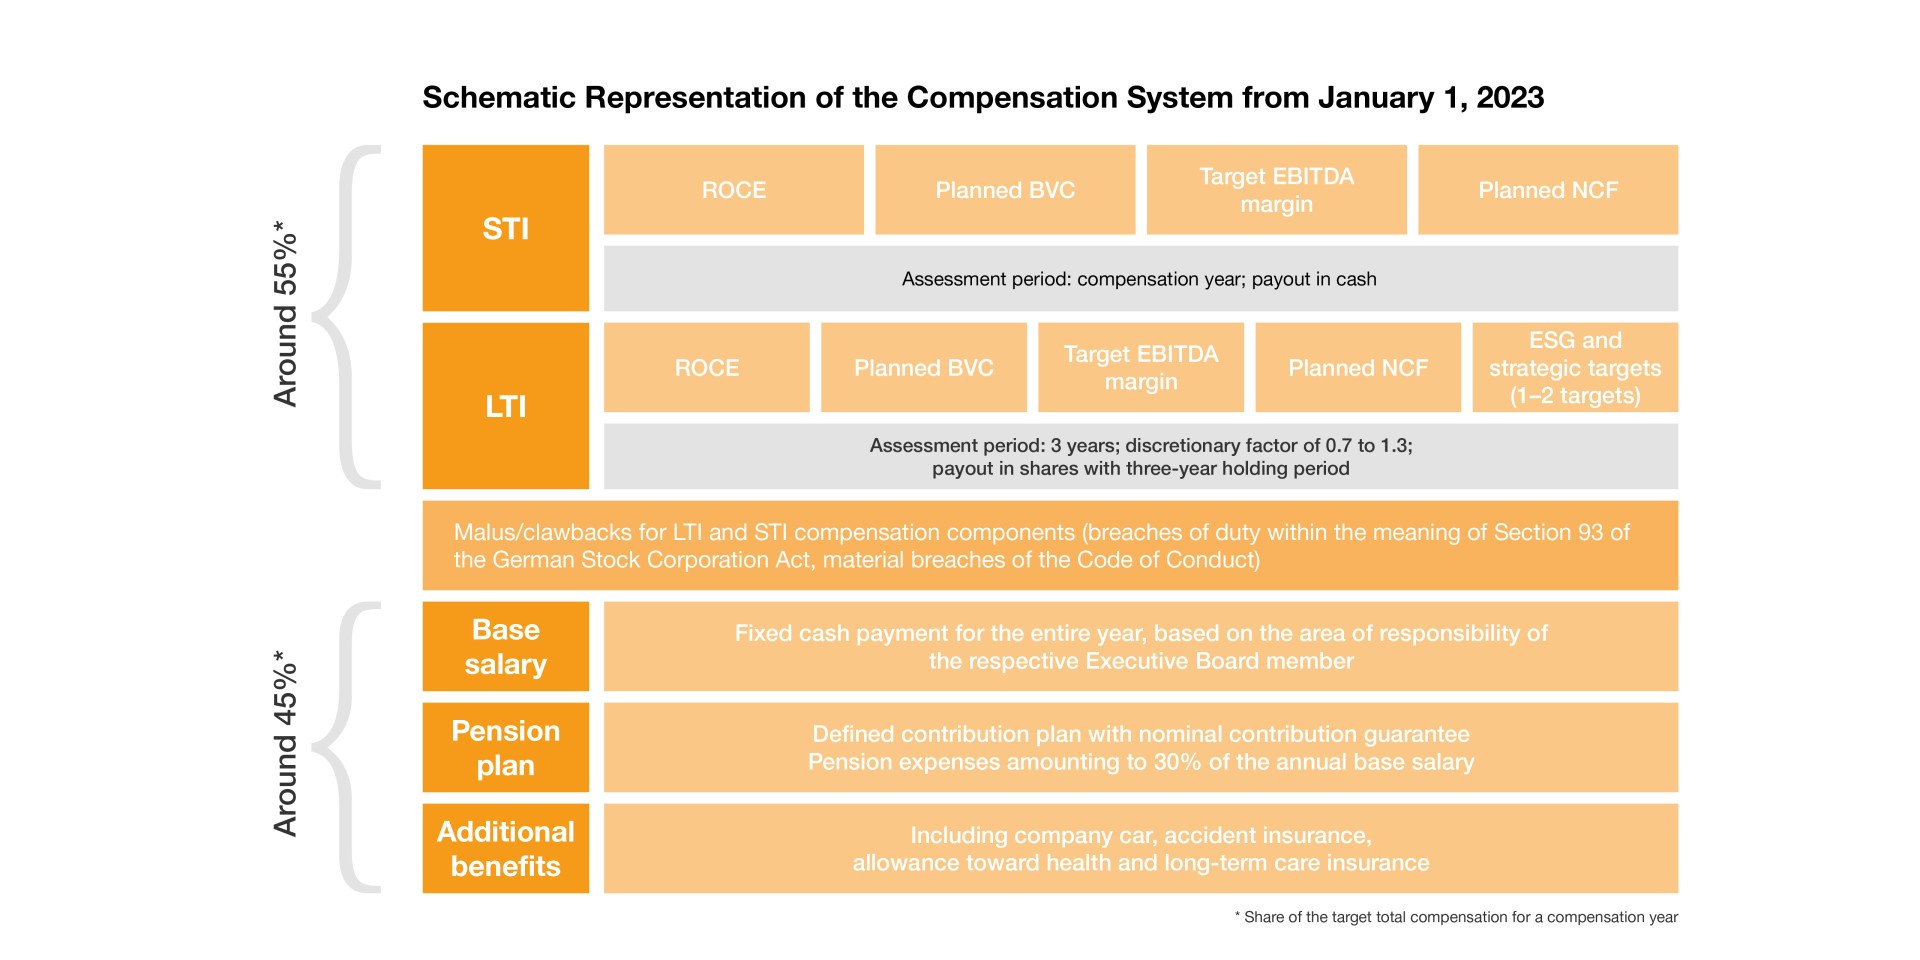 Schematic Representation of the Compensation System from January 1, 2023